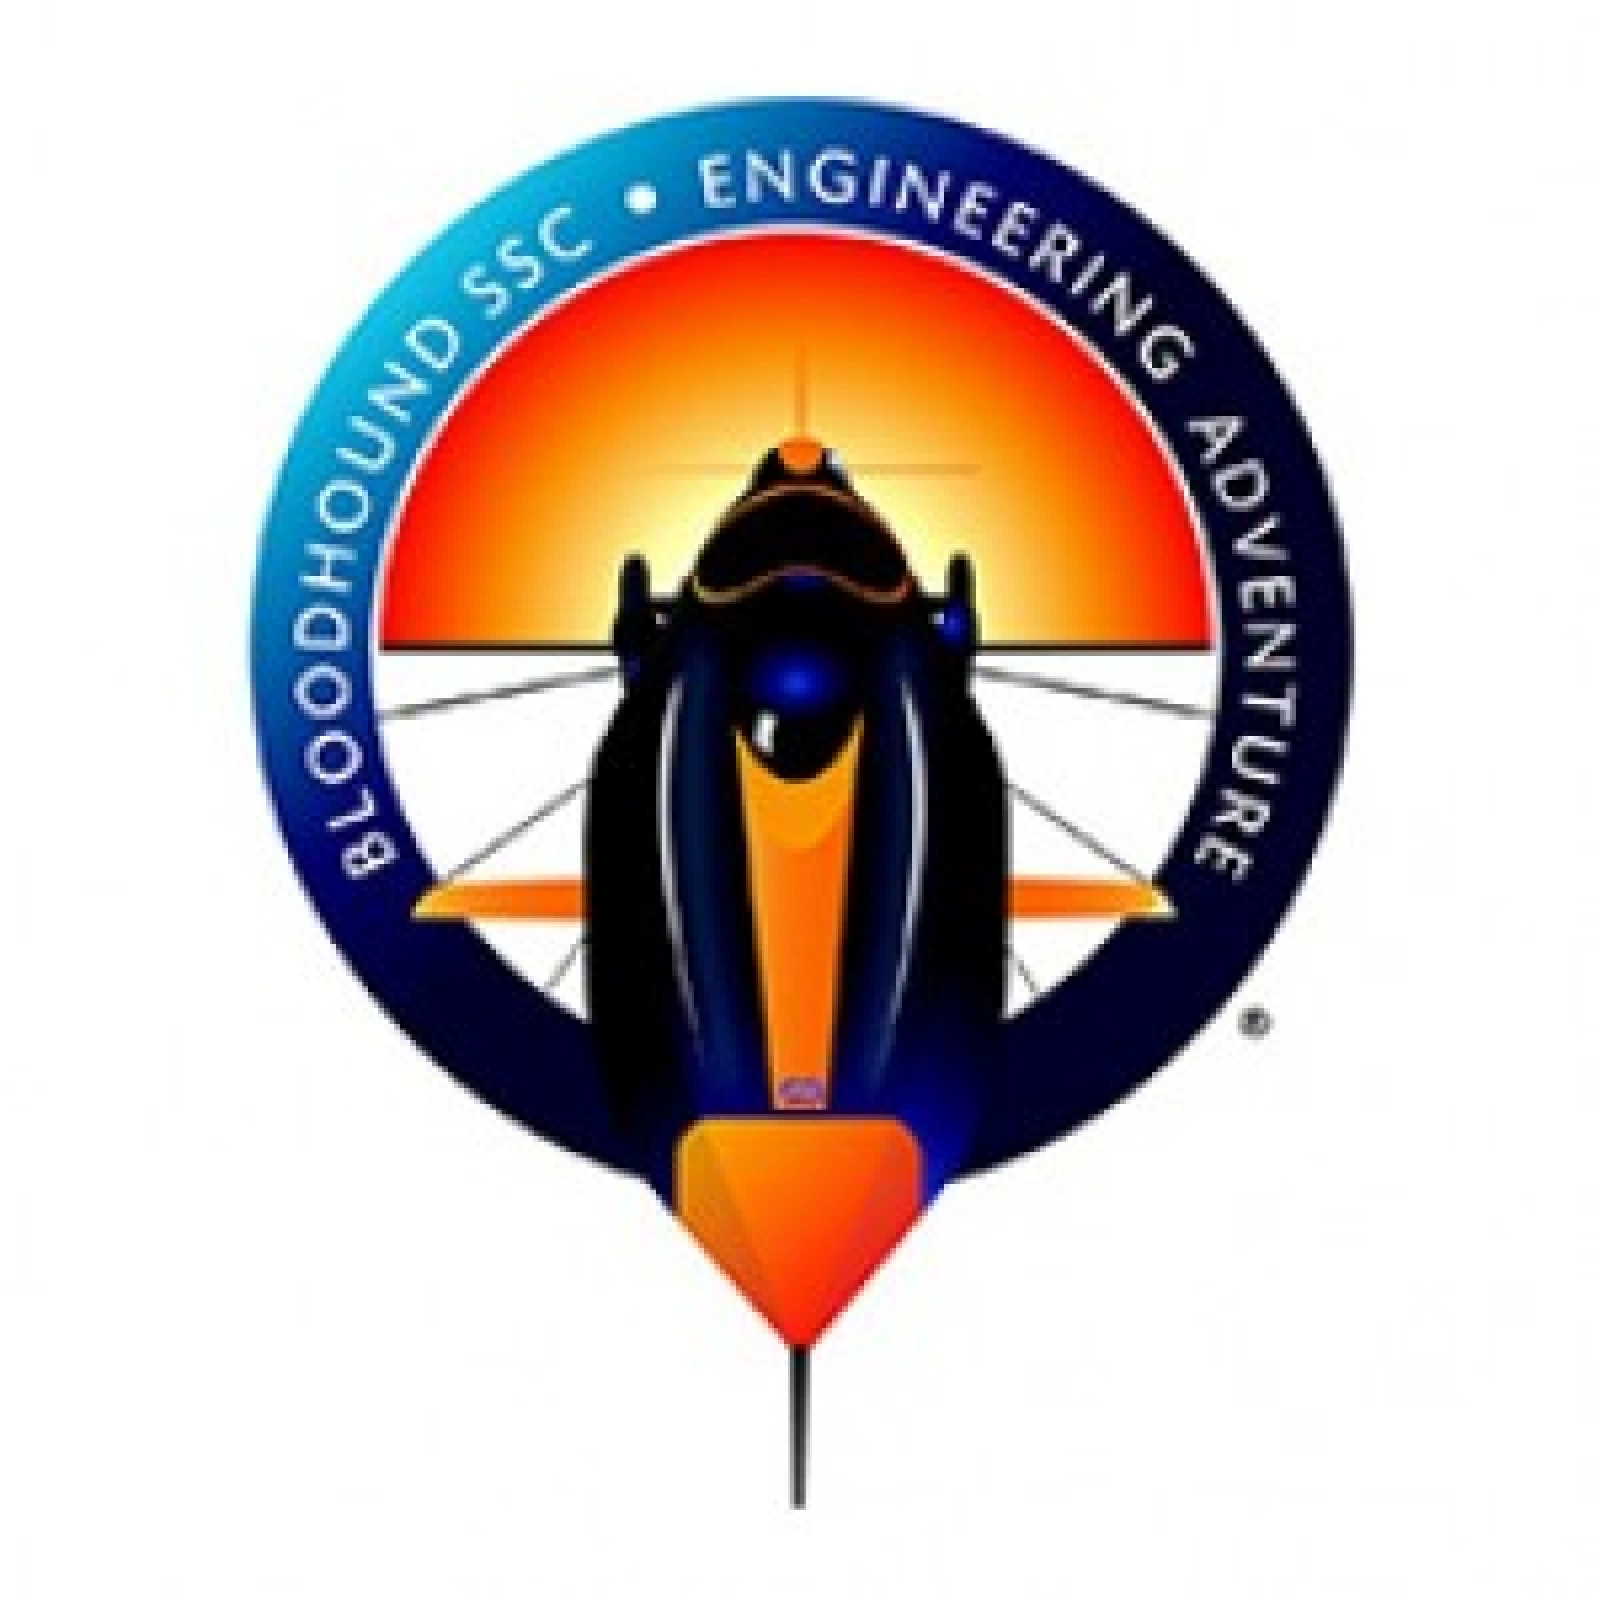 Supporting Bloodhound SSC